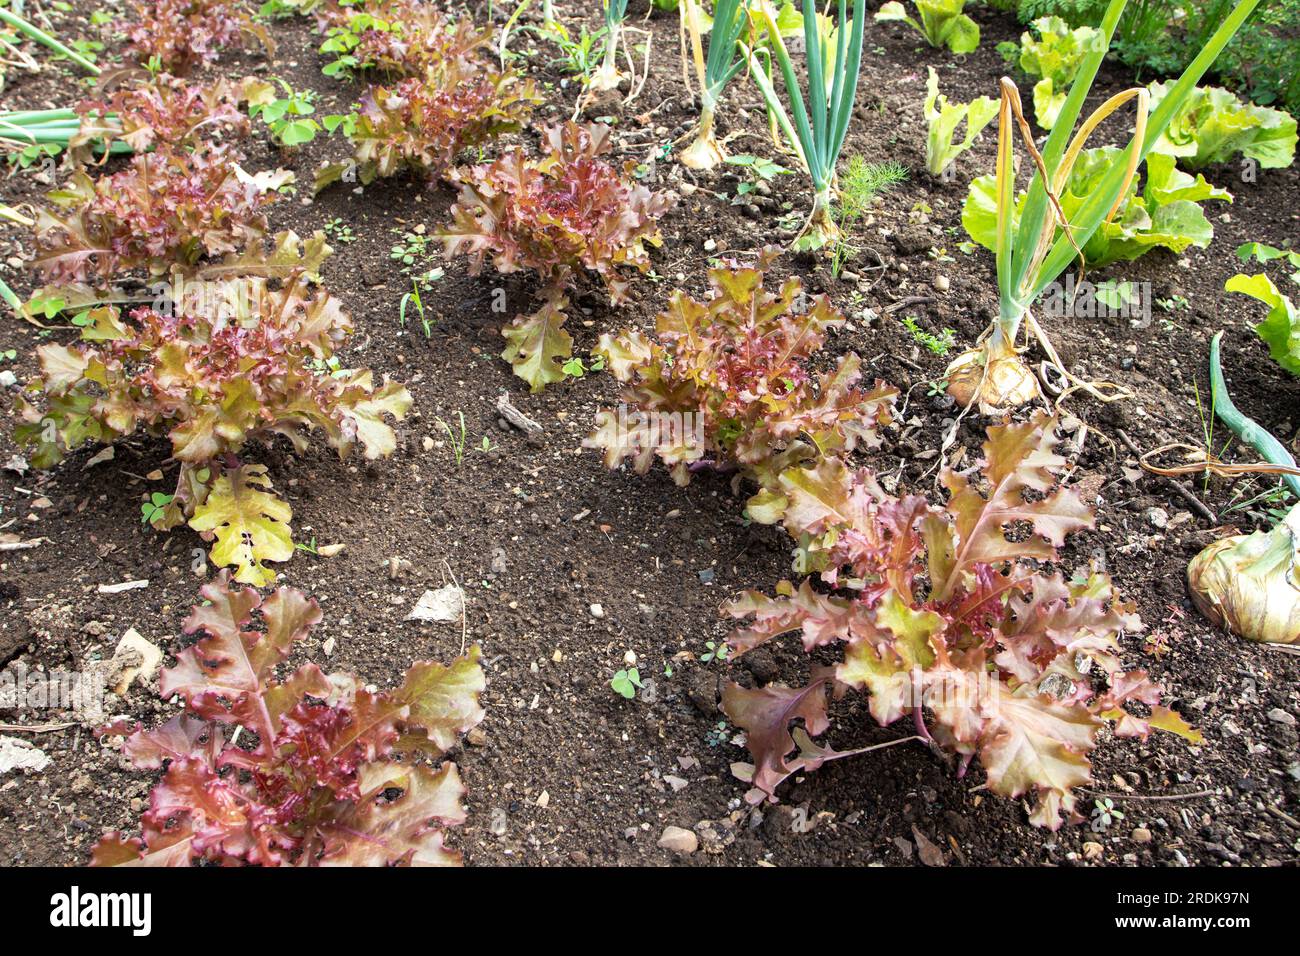 Companion plants at the vegetable bed. Red and green lettuce and onion. Organic gardening.Pests control. Stock Photo